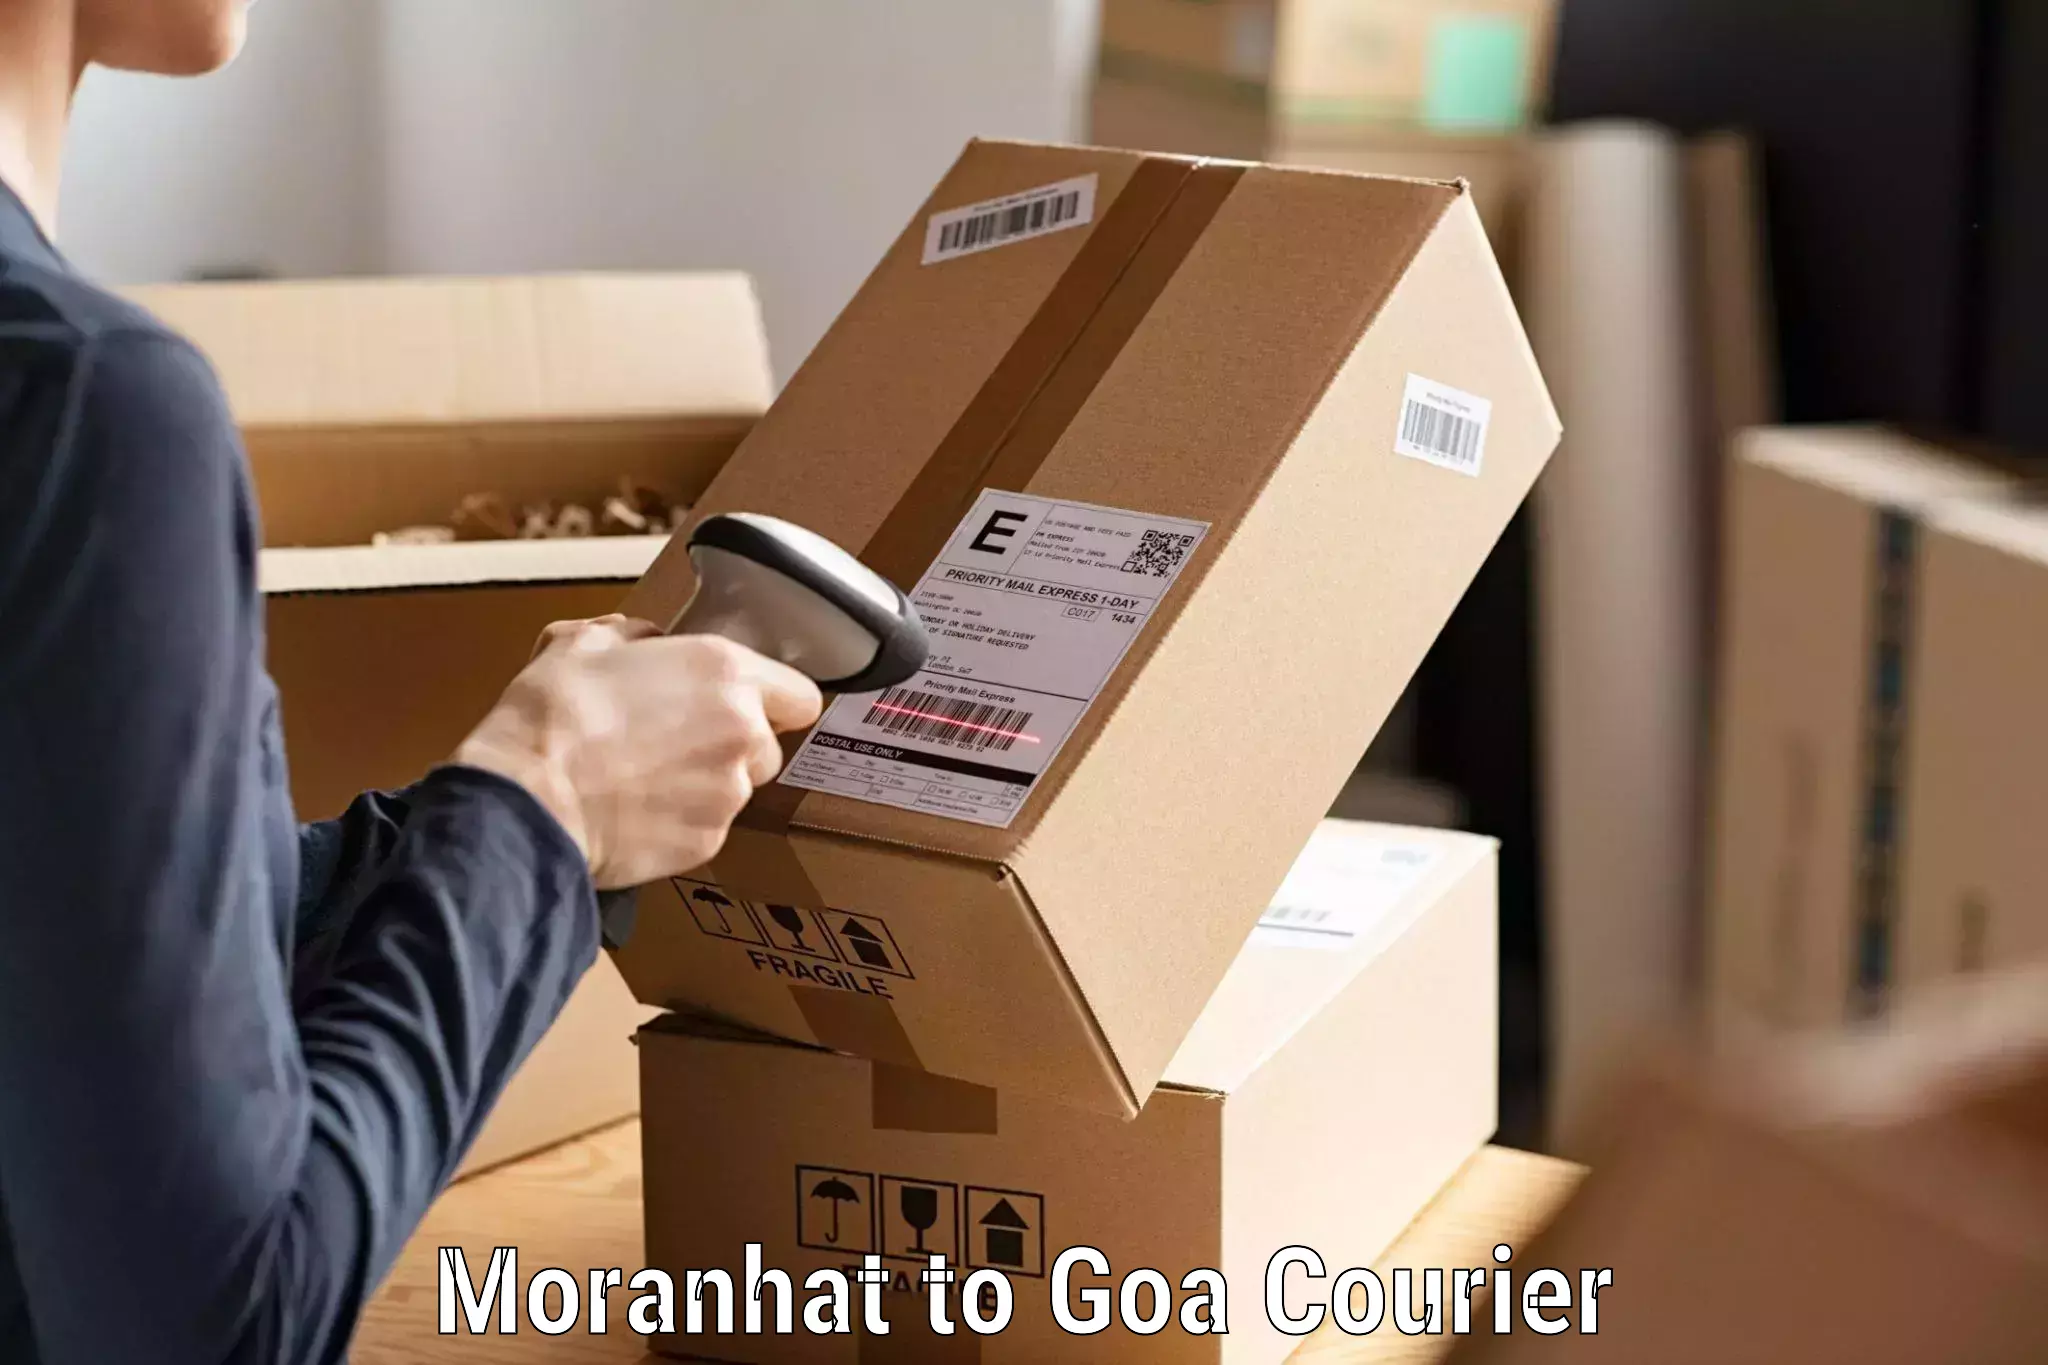 Advanced tracking systems in Moranhat to Goa